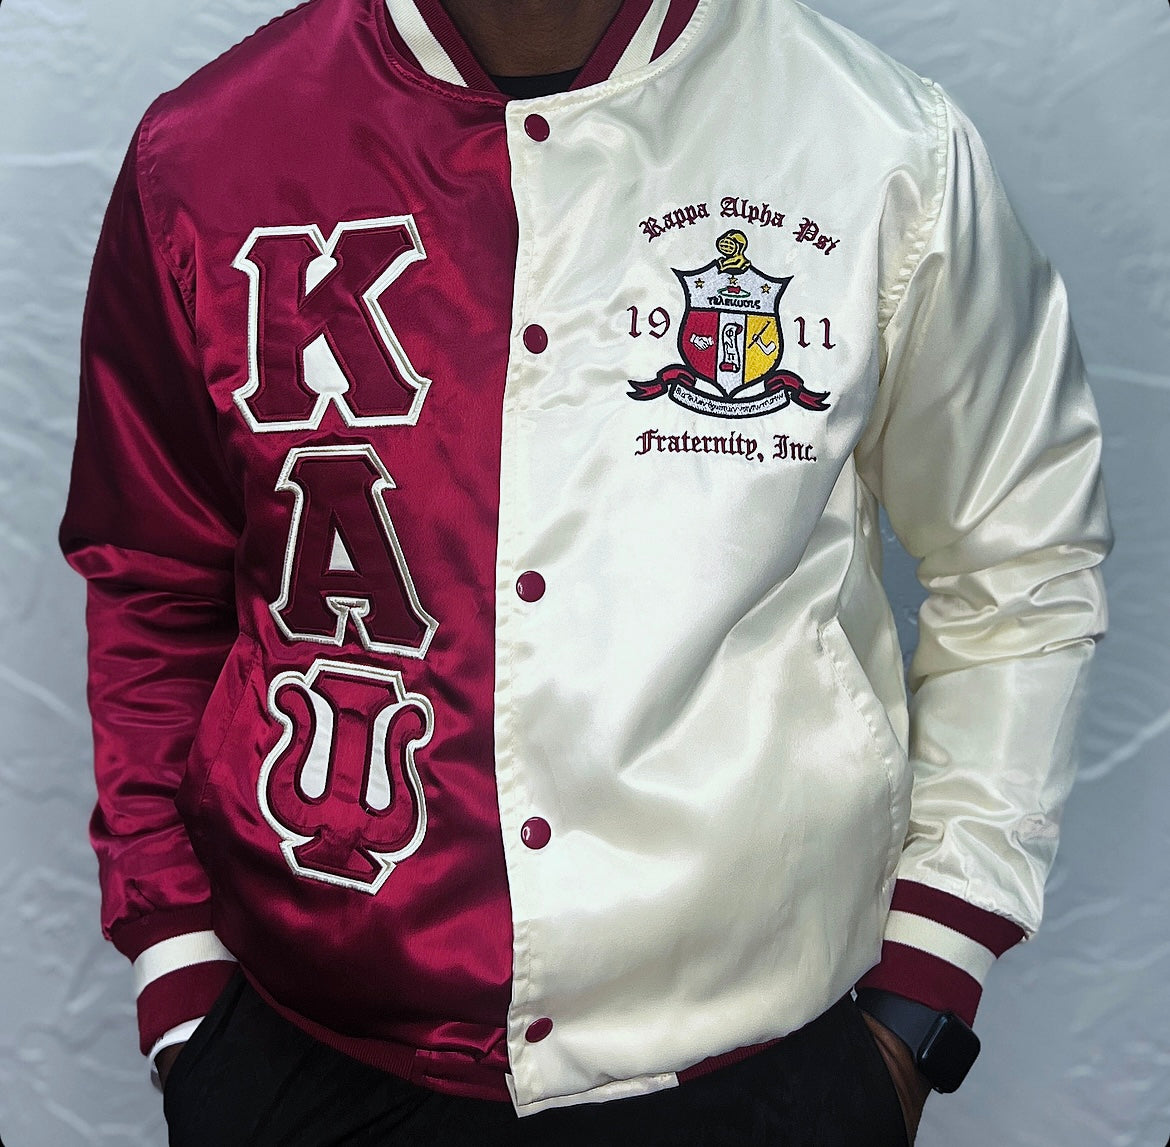 Show off your Kappa Alpha Psi pride with this stylish satin baseball jacket. Featuring the fraternity's iconic colors and crest, this jacket is perfect for any member of Kappa Alpha Psi. Made with high-quality materials, this jacket is not only fashionable but also durable. Represent your organization in style with this must-have addition to your wardrobe.